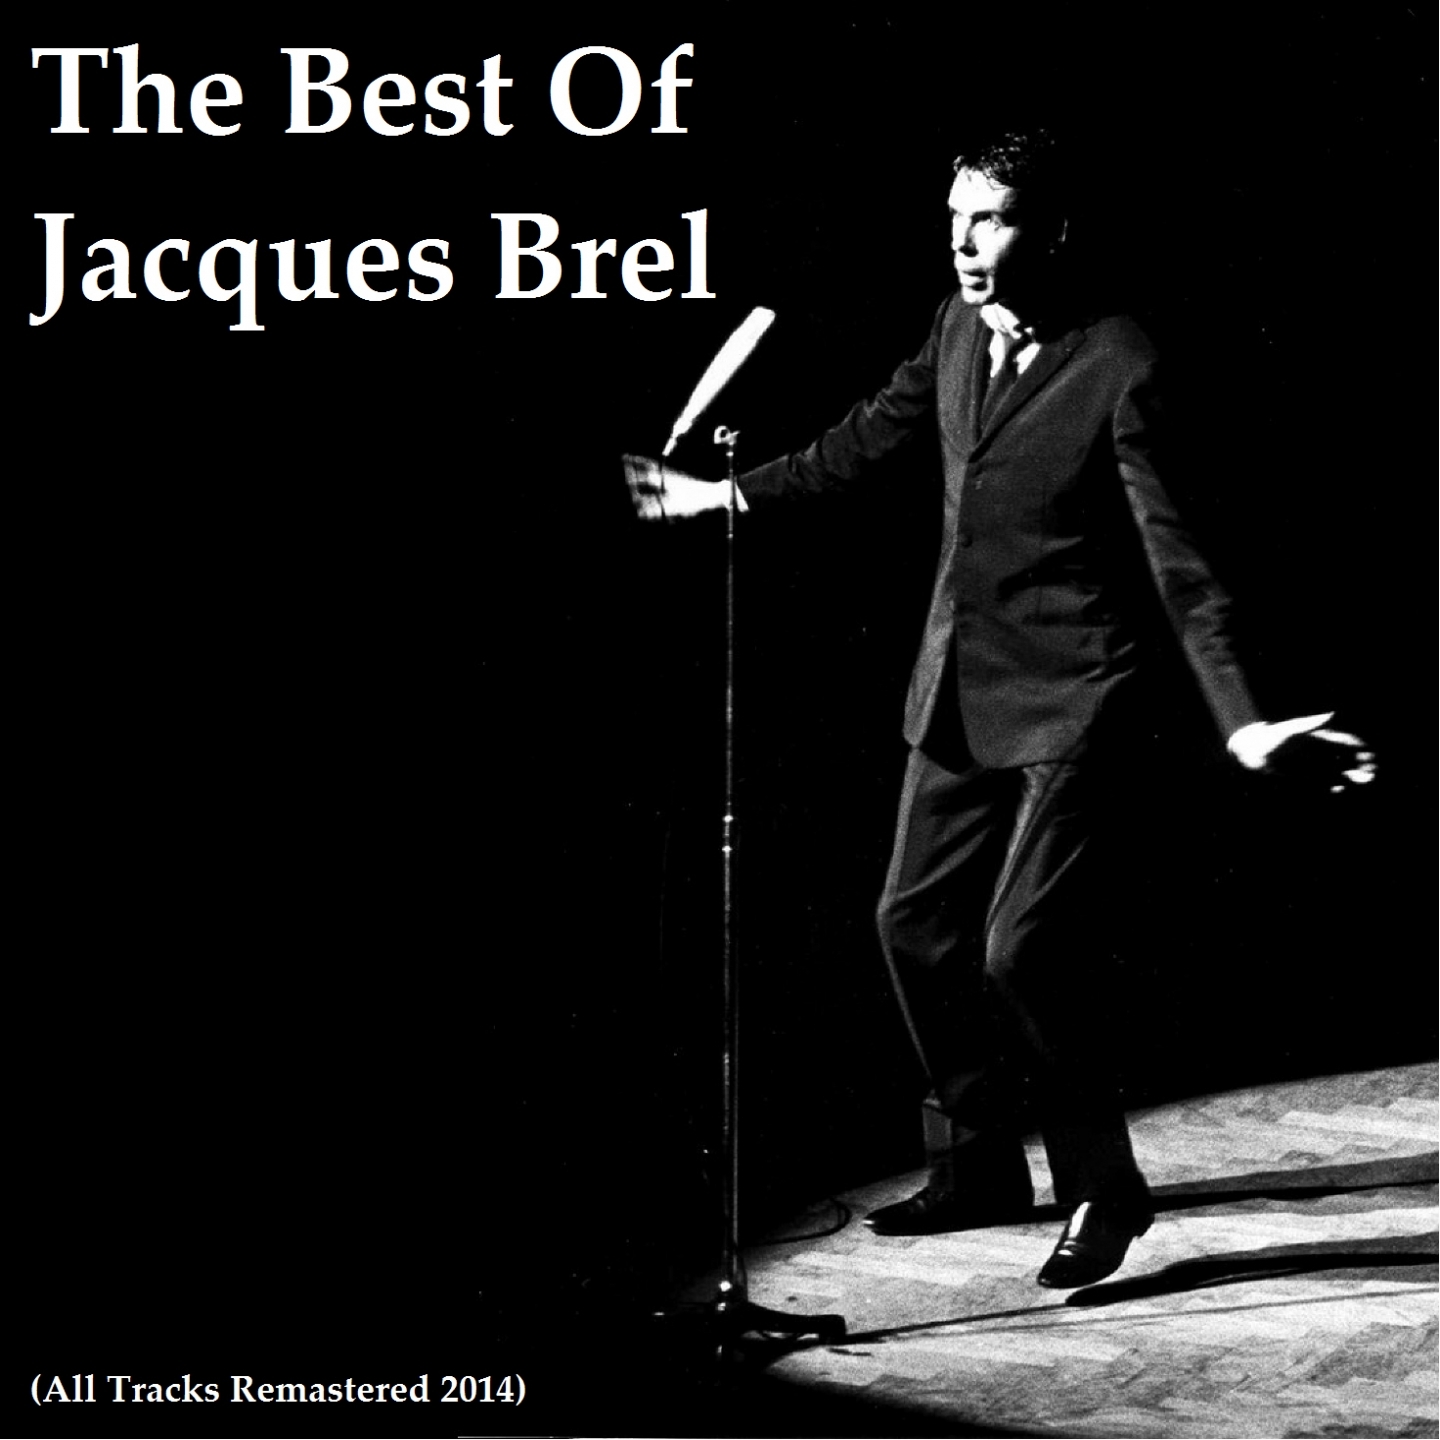 The Best of Jacques Brel (All Tracks Remastered 2014)